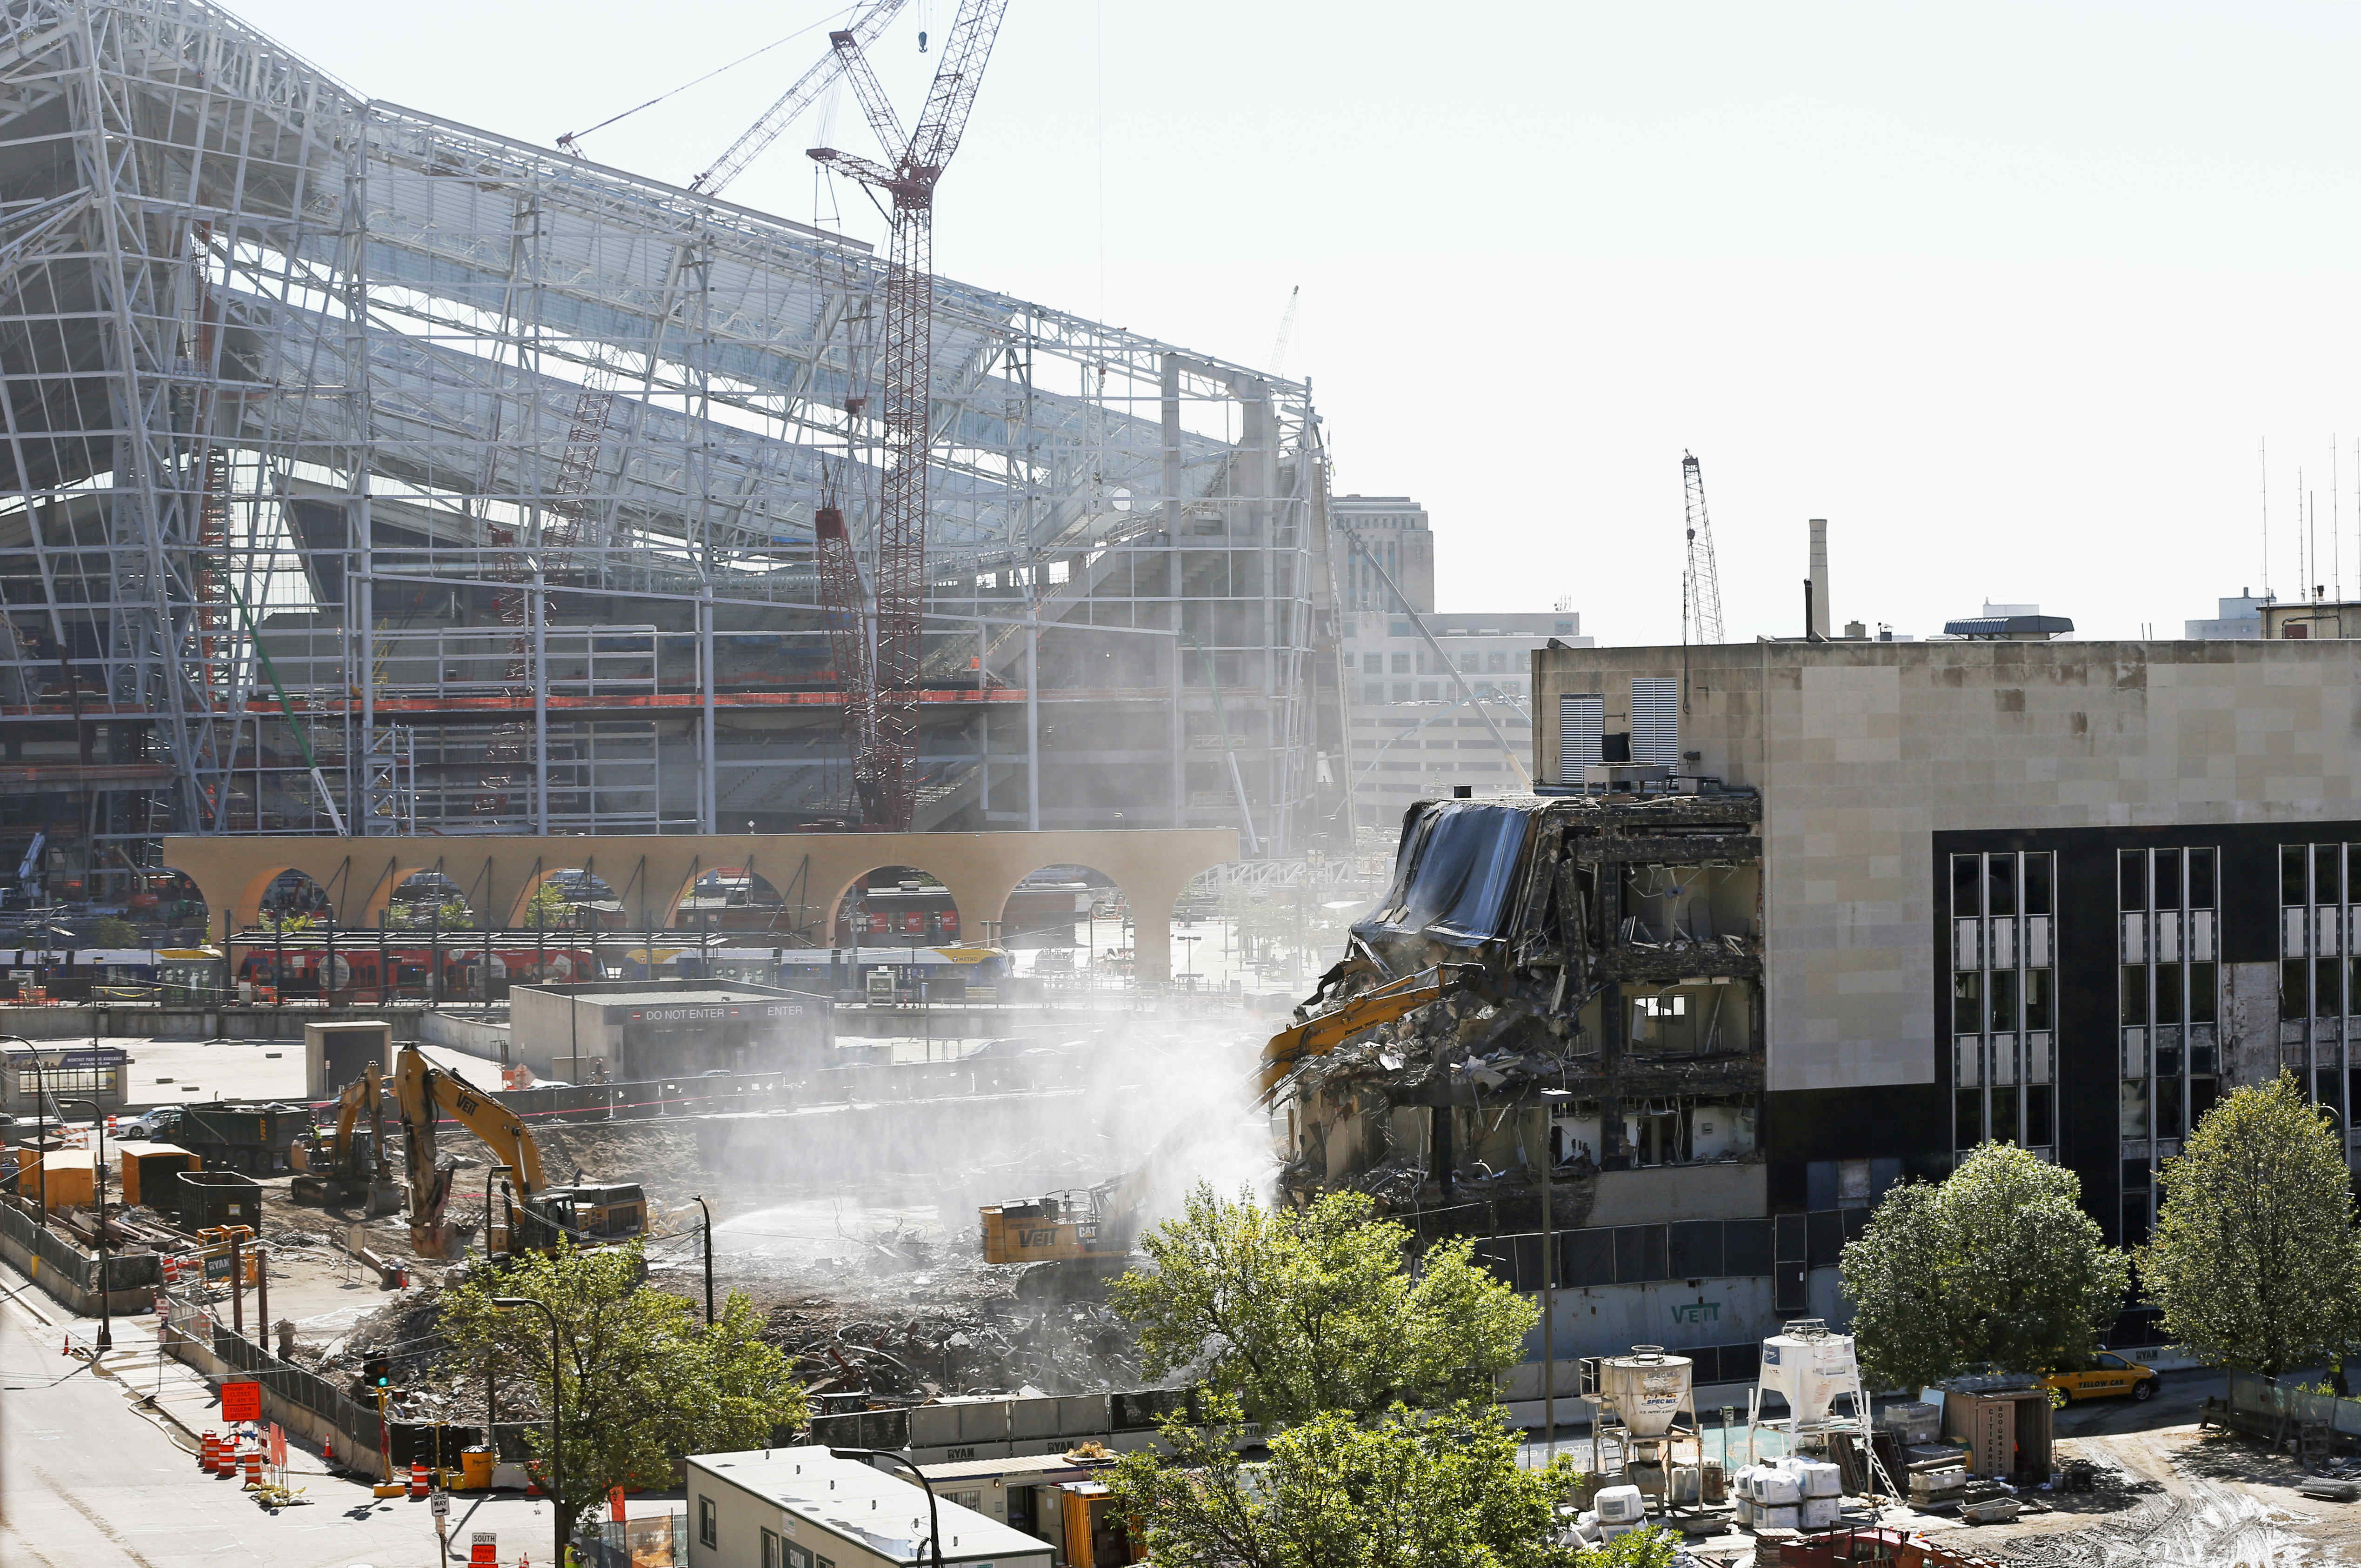 The new U.S. Bank Stadium, home of the Minnesota Vikings NFL football team which opens in 2016, looms in the background as demolition of the Star Tribune building, right, continues Thursday, Sept. 10, 2015, to make room for a park adjacent to the stadium in Minneapolis. The city council is expected to vote Friday on whether to approve the design and fundraising arrangement for the park. (AP Photo/Jim Mone)